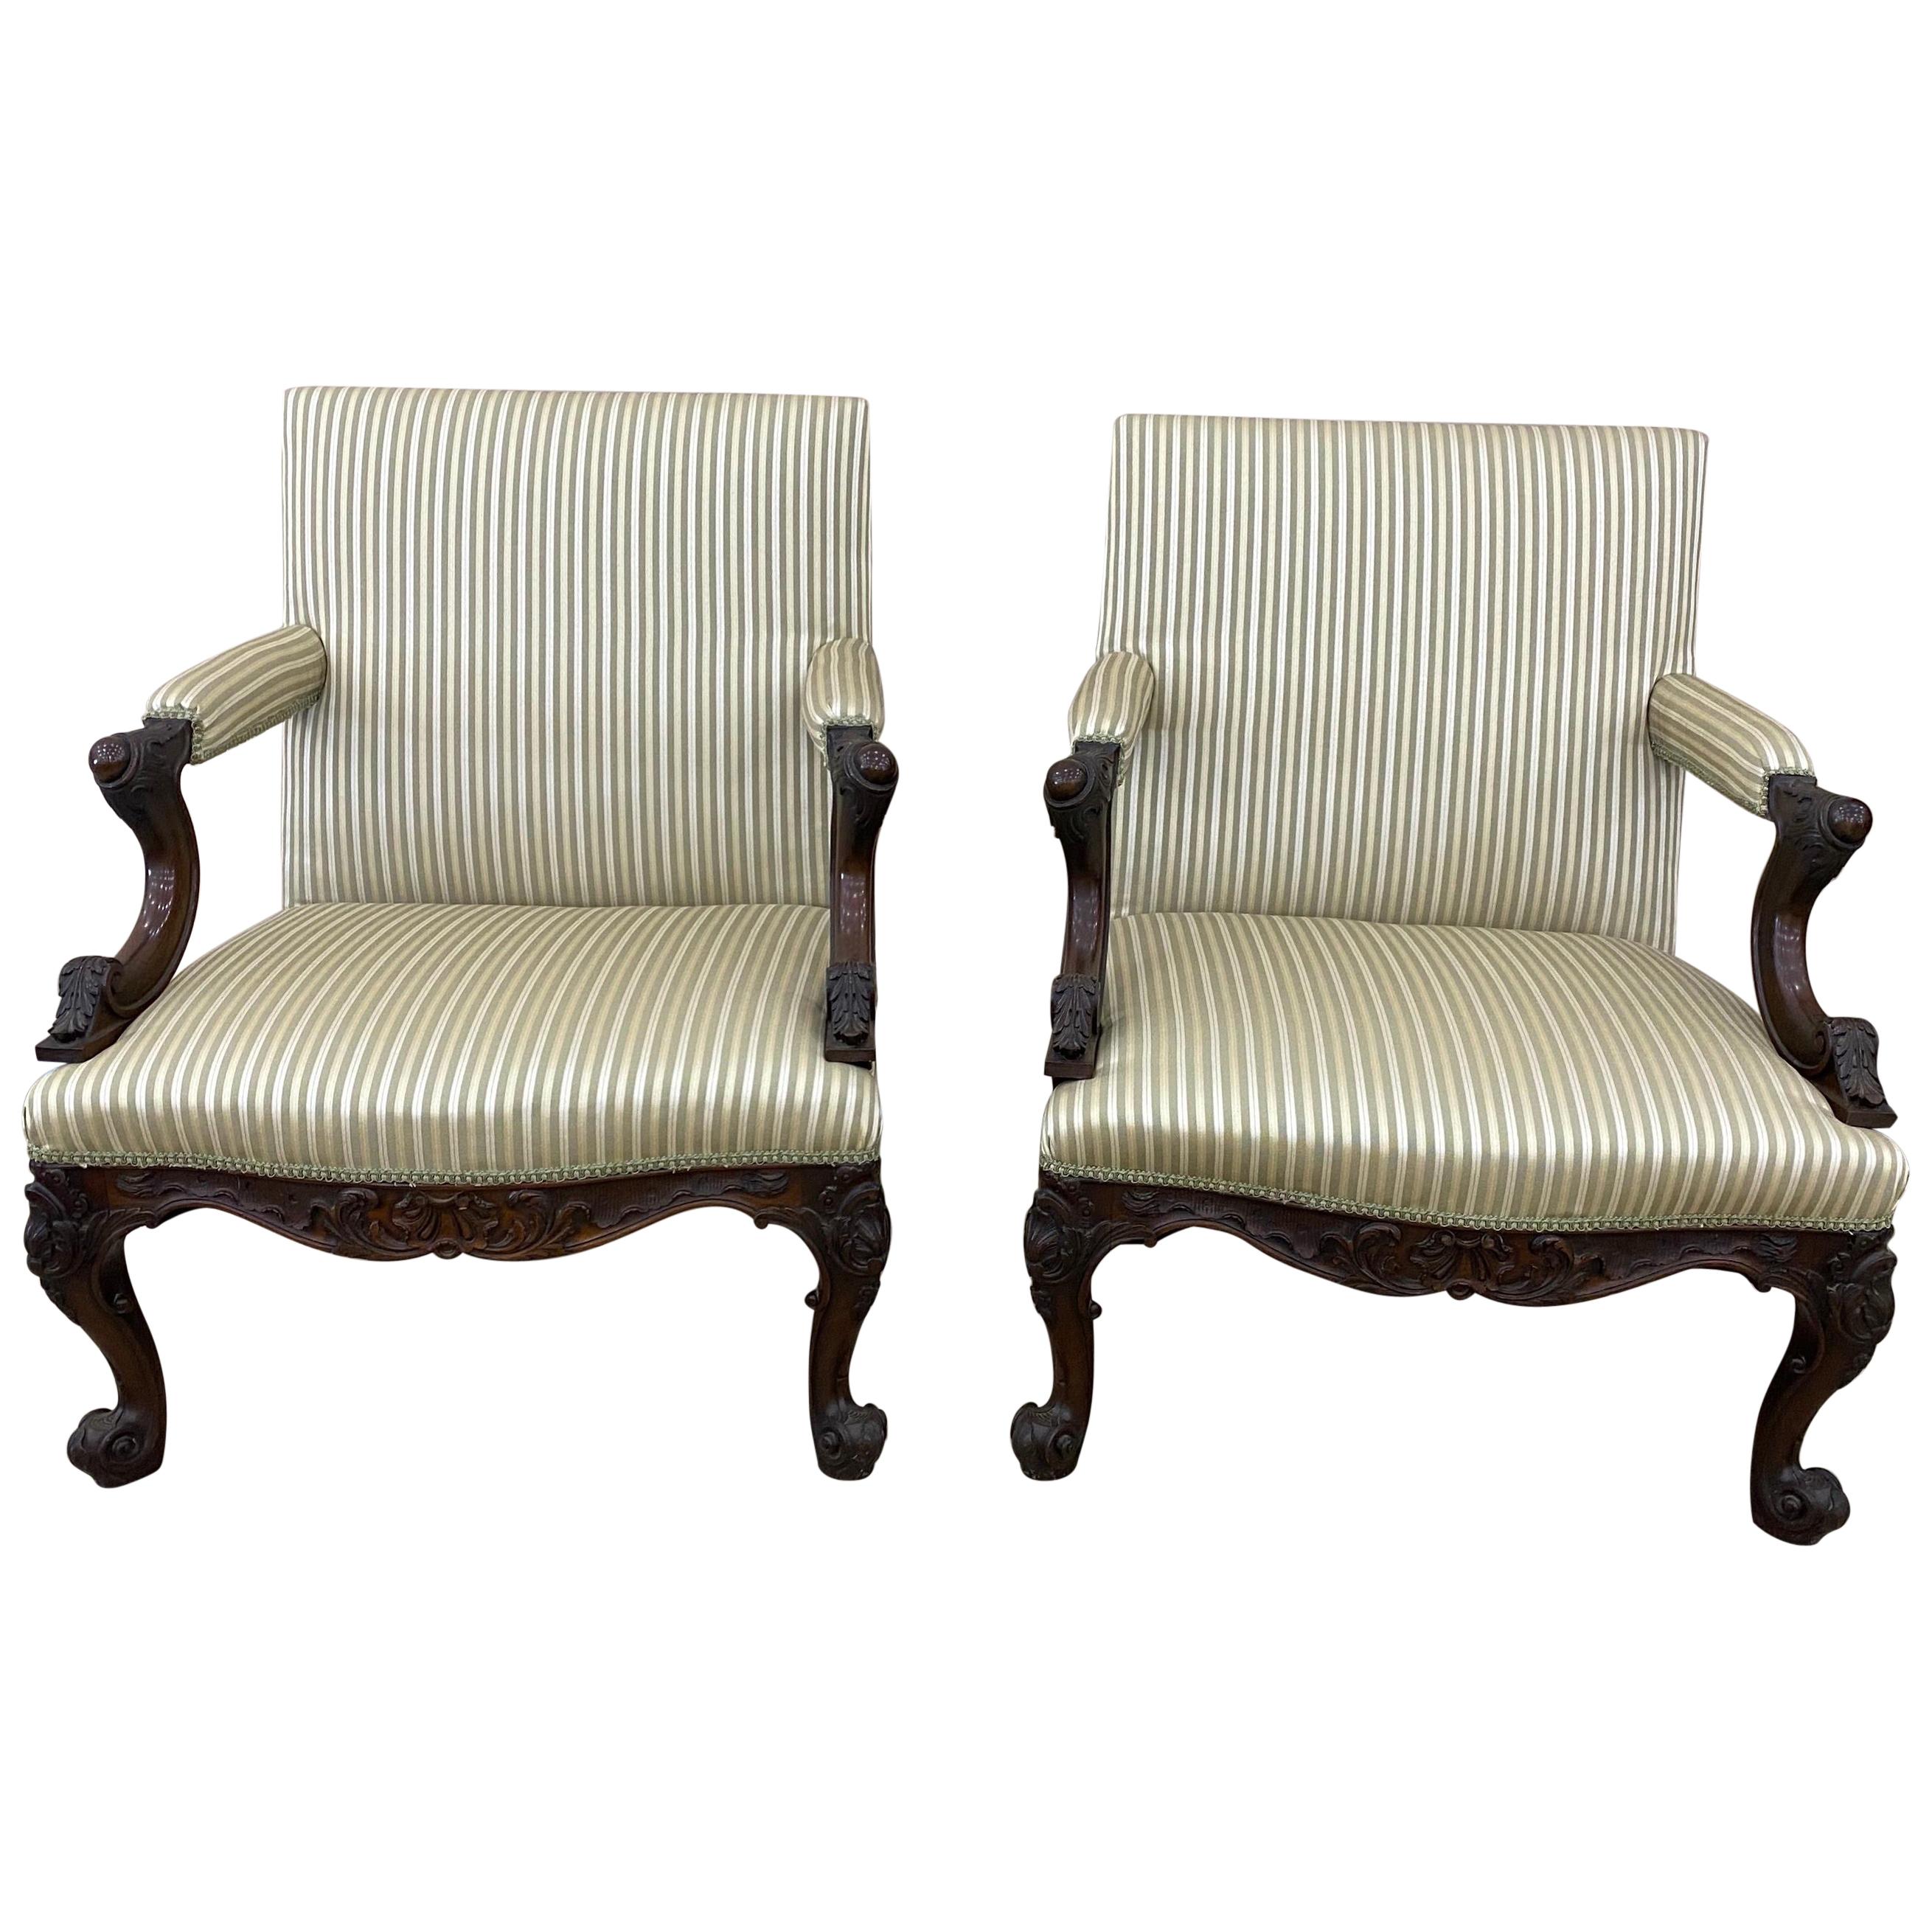 Fine Pair of Early 19th Century Georgian Mahogany Gainsborough Chairs For Sale